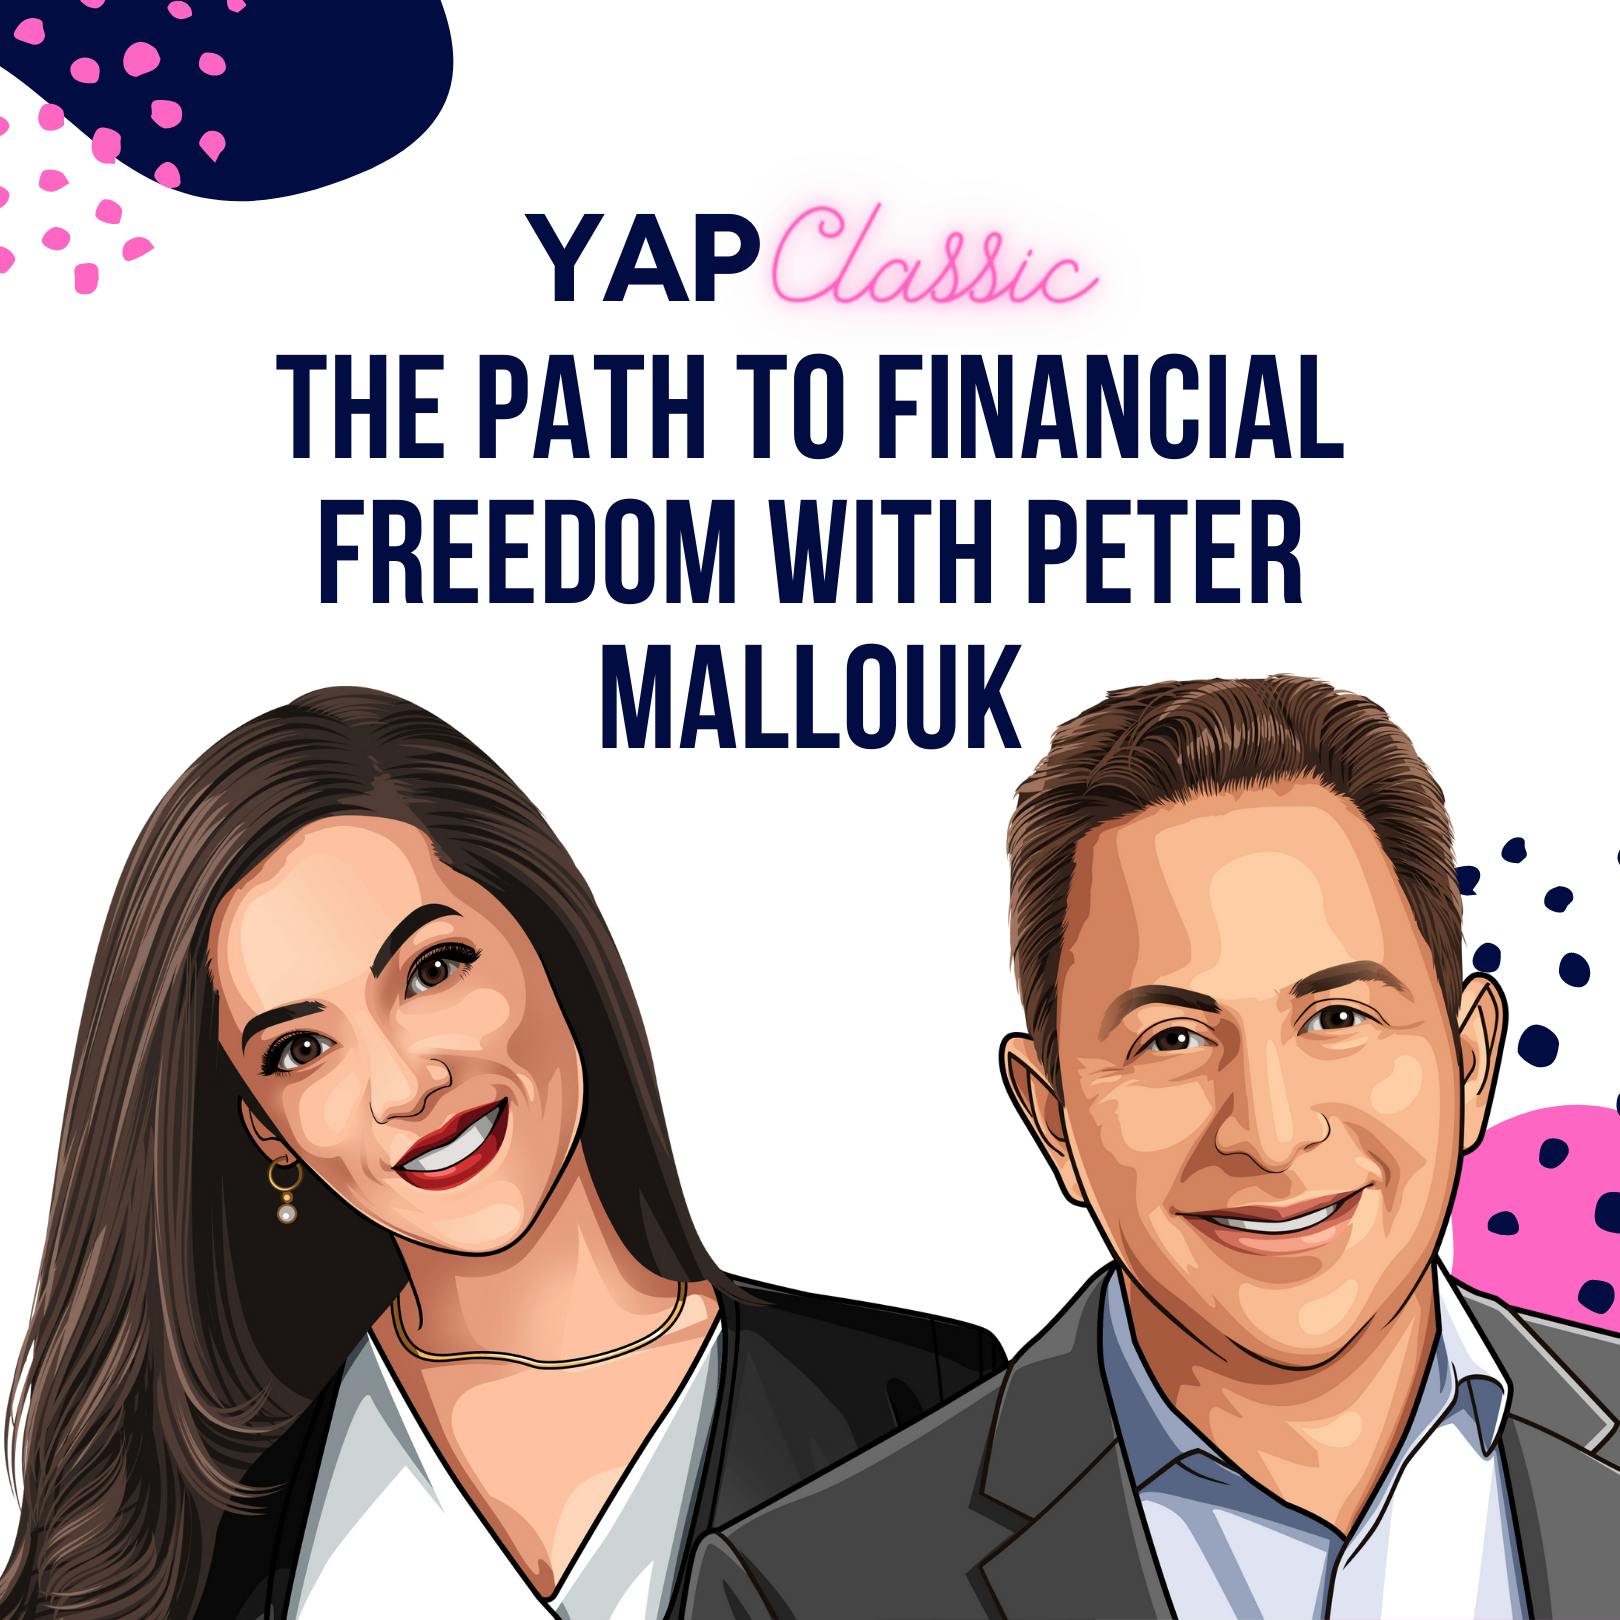 #YAPClassic: The Path to Financial Freedom with Peter Mallouk